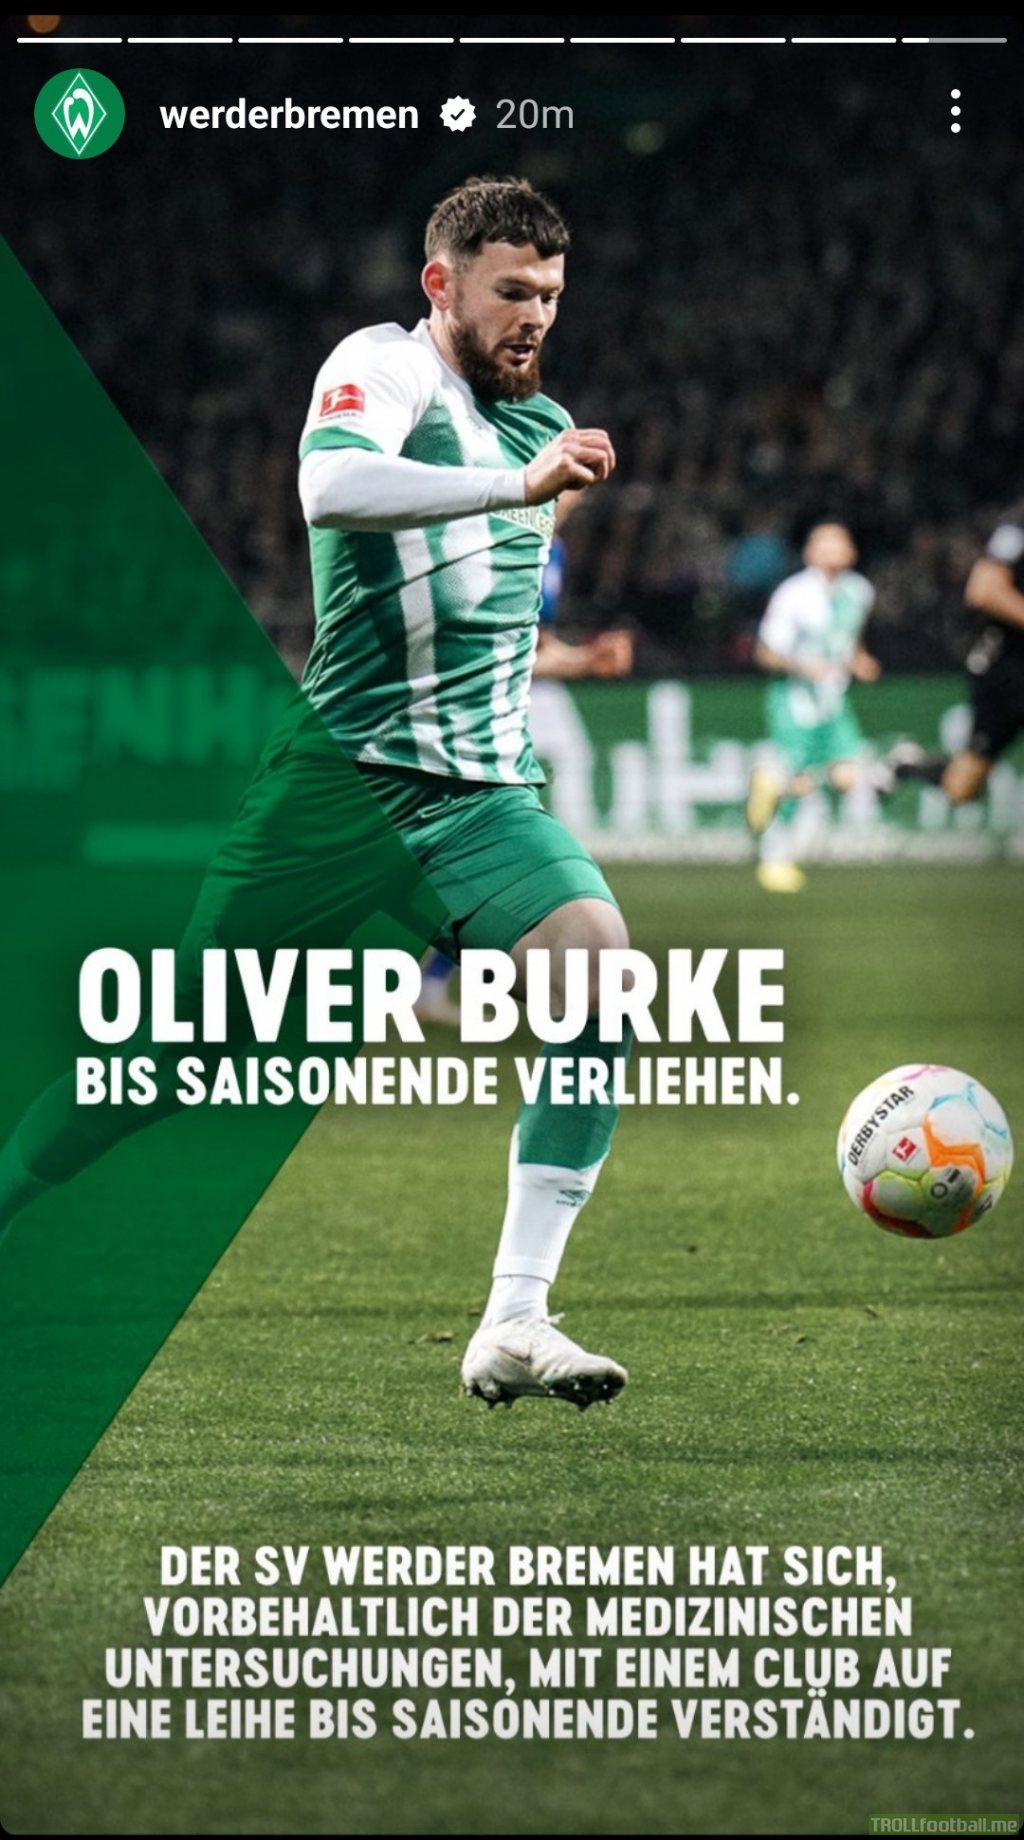 [Werder Bremen] Oliver Burke is being loaned out until the end of the season to an undisclosed club